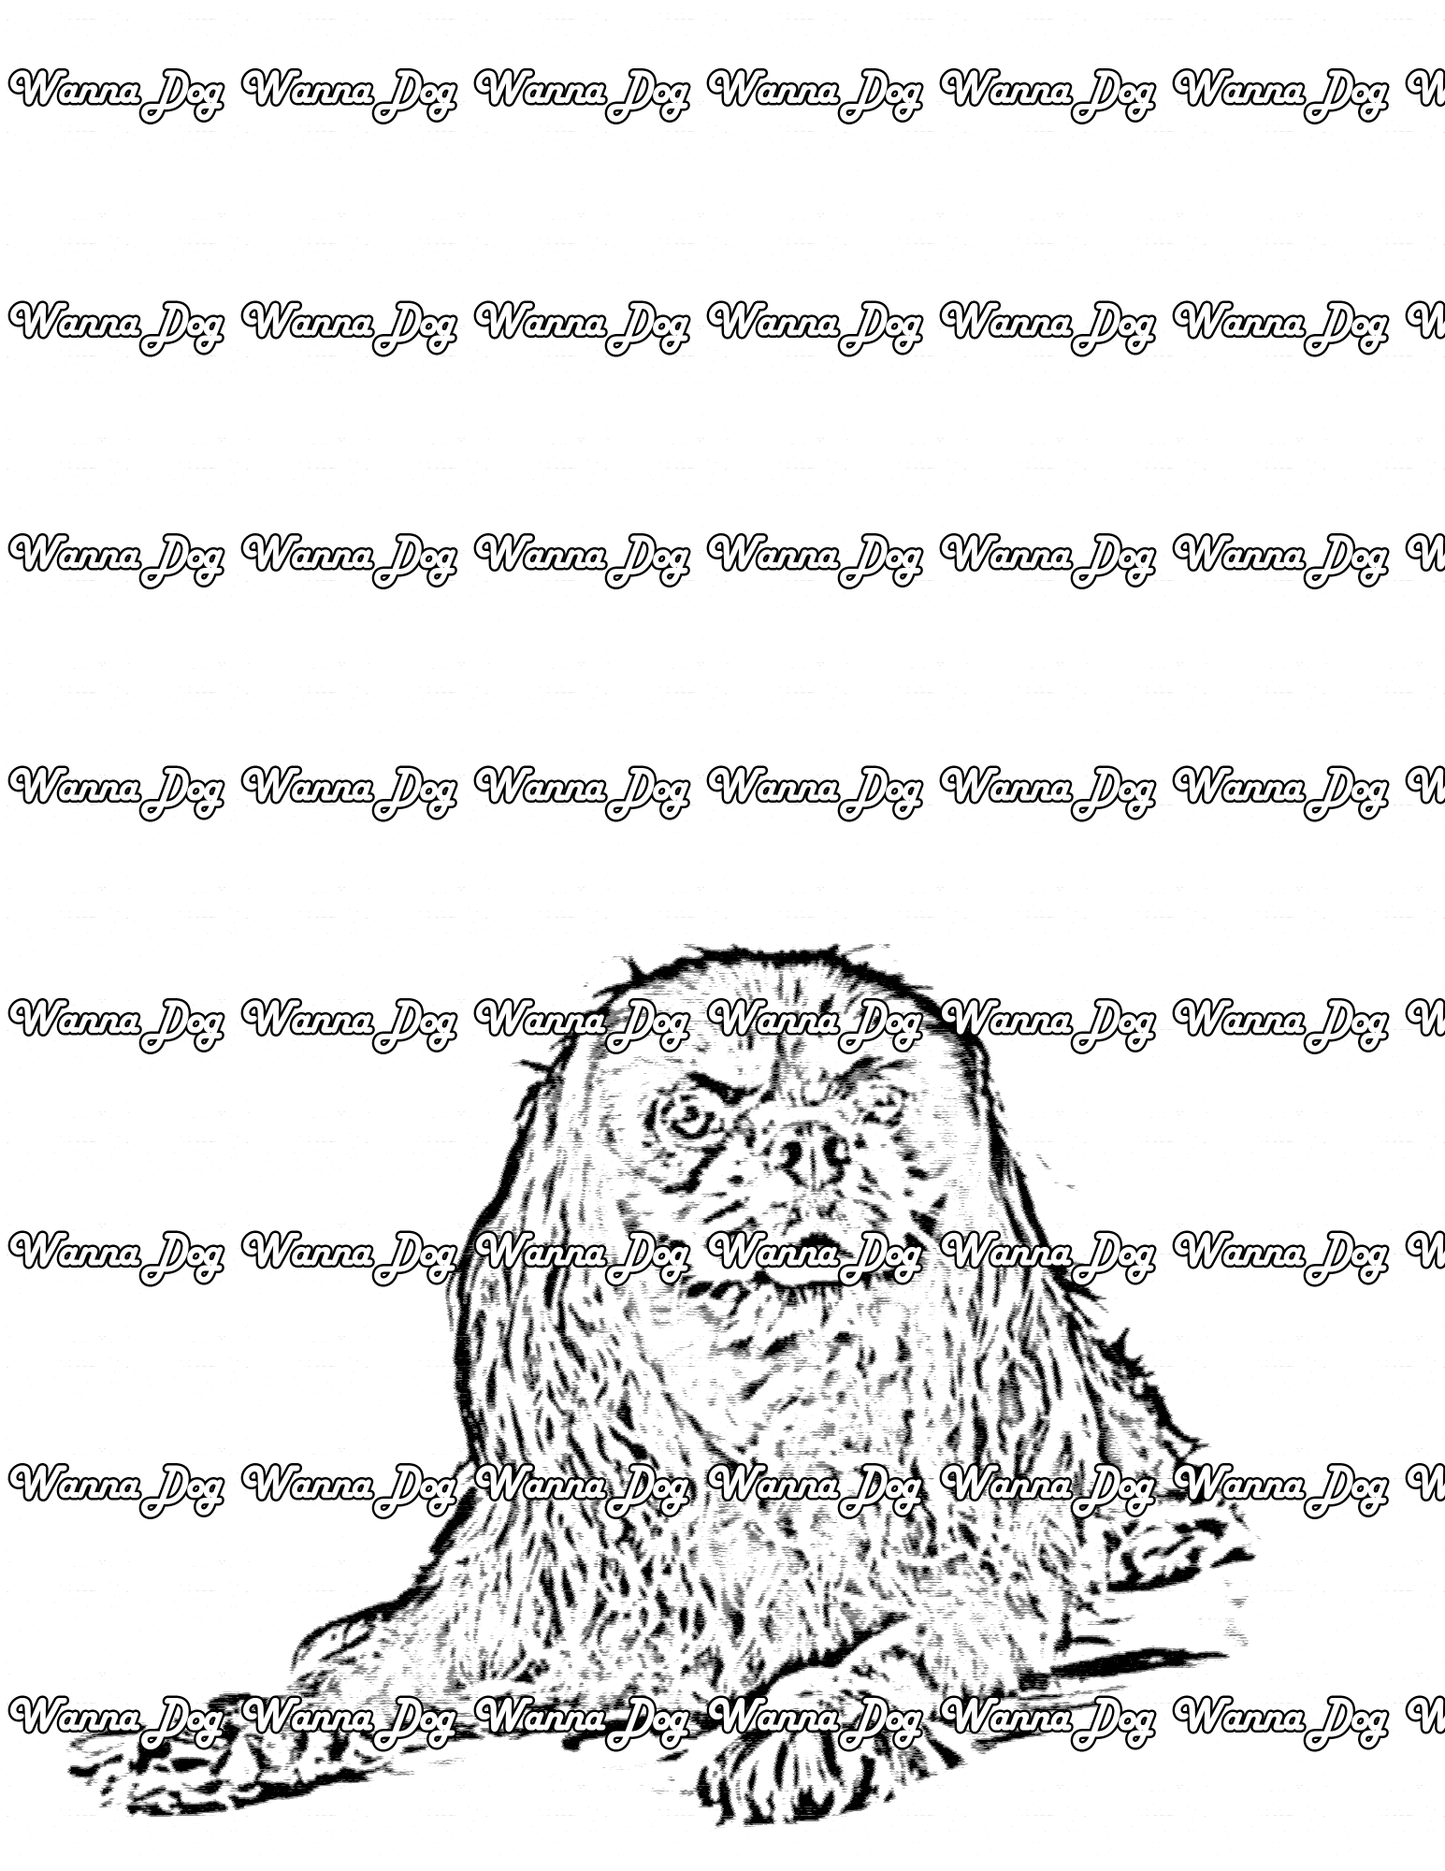 Cavalier King Charles Spaniel Coloring Page of a Cavalier King Charles Spaniel sitting for the camera